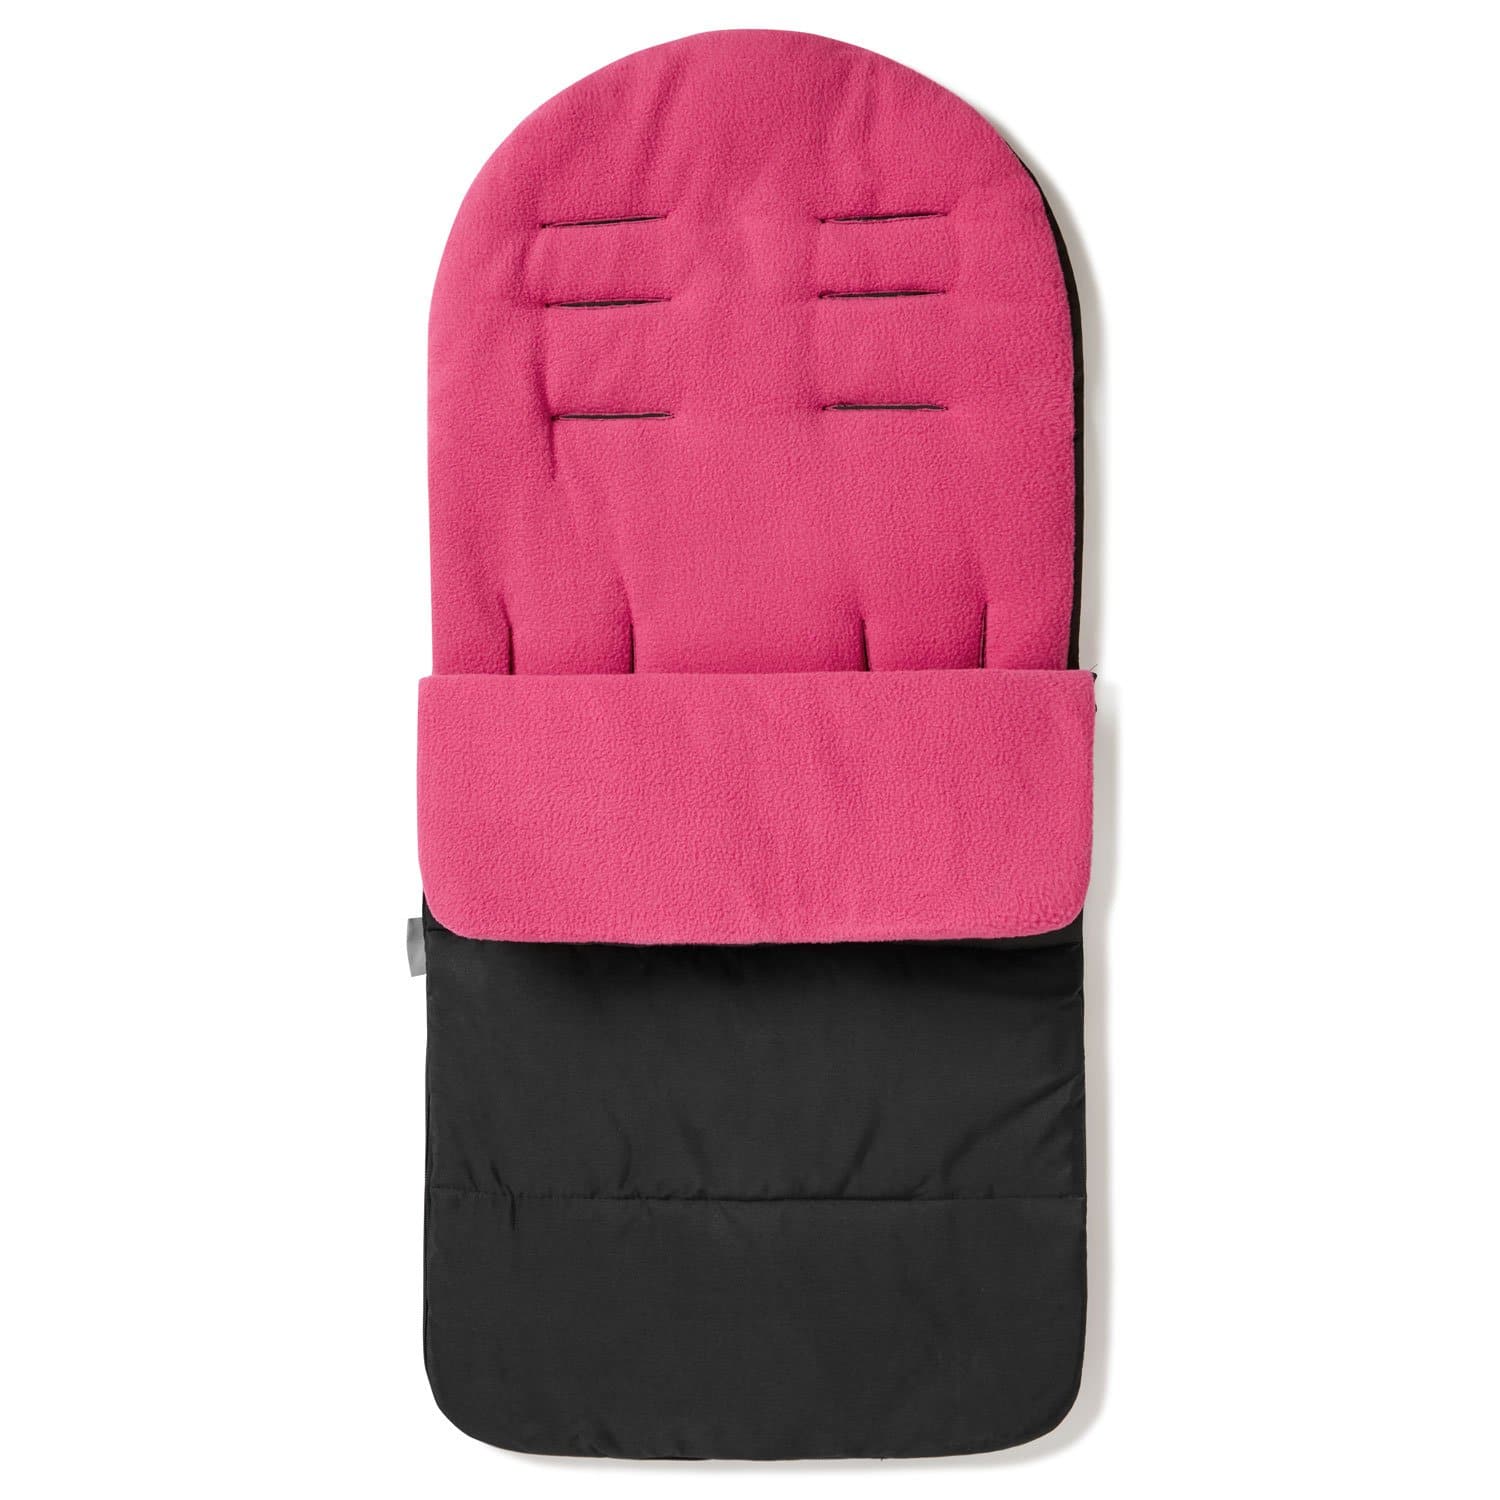 Premium Footmuff / Cosy Toes Compatible with Cosatto - Pink Rose / Fits All Models | For Your Little One